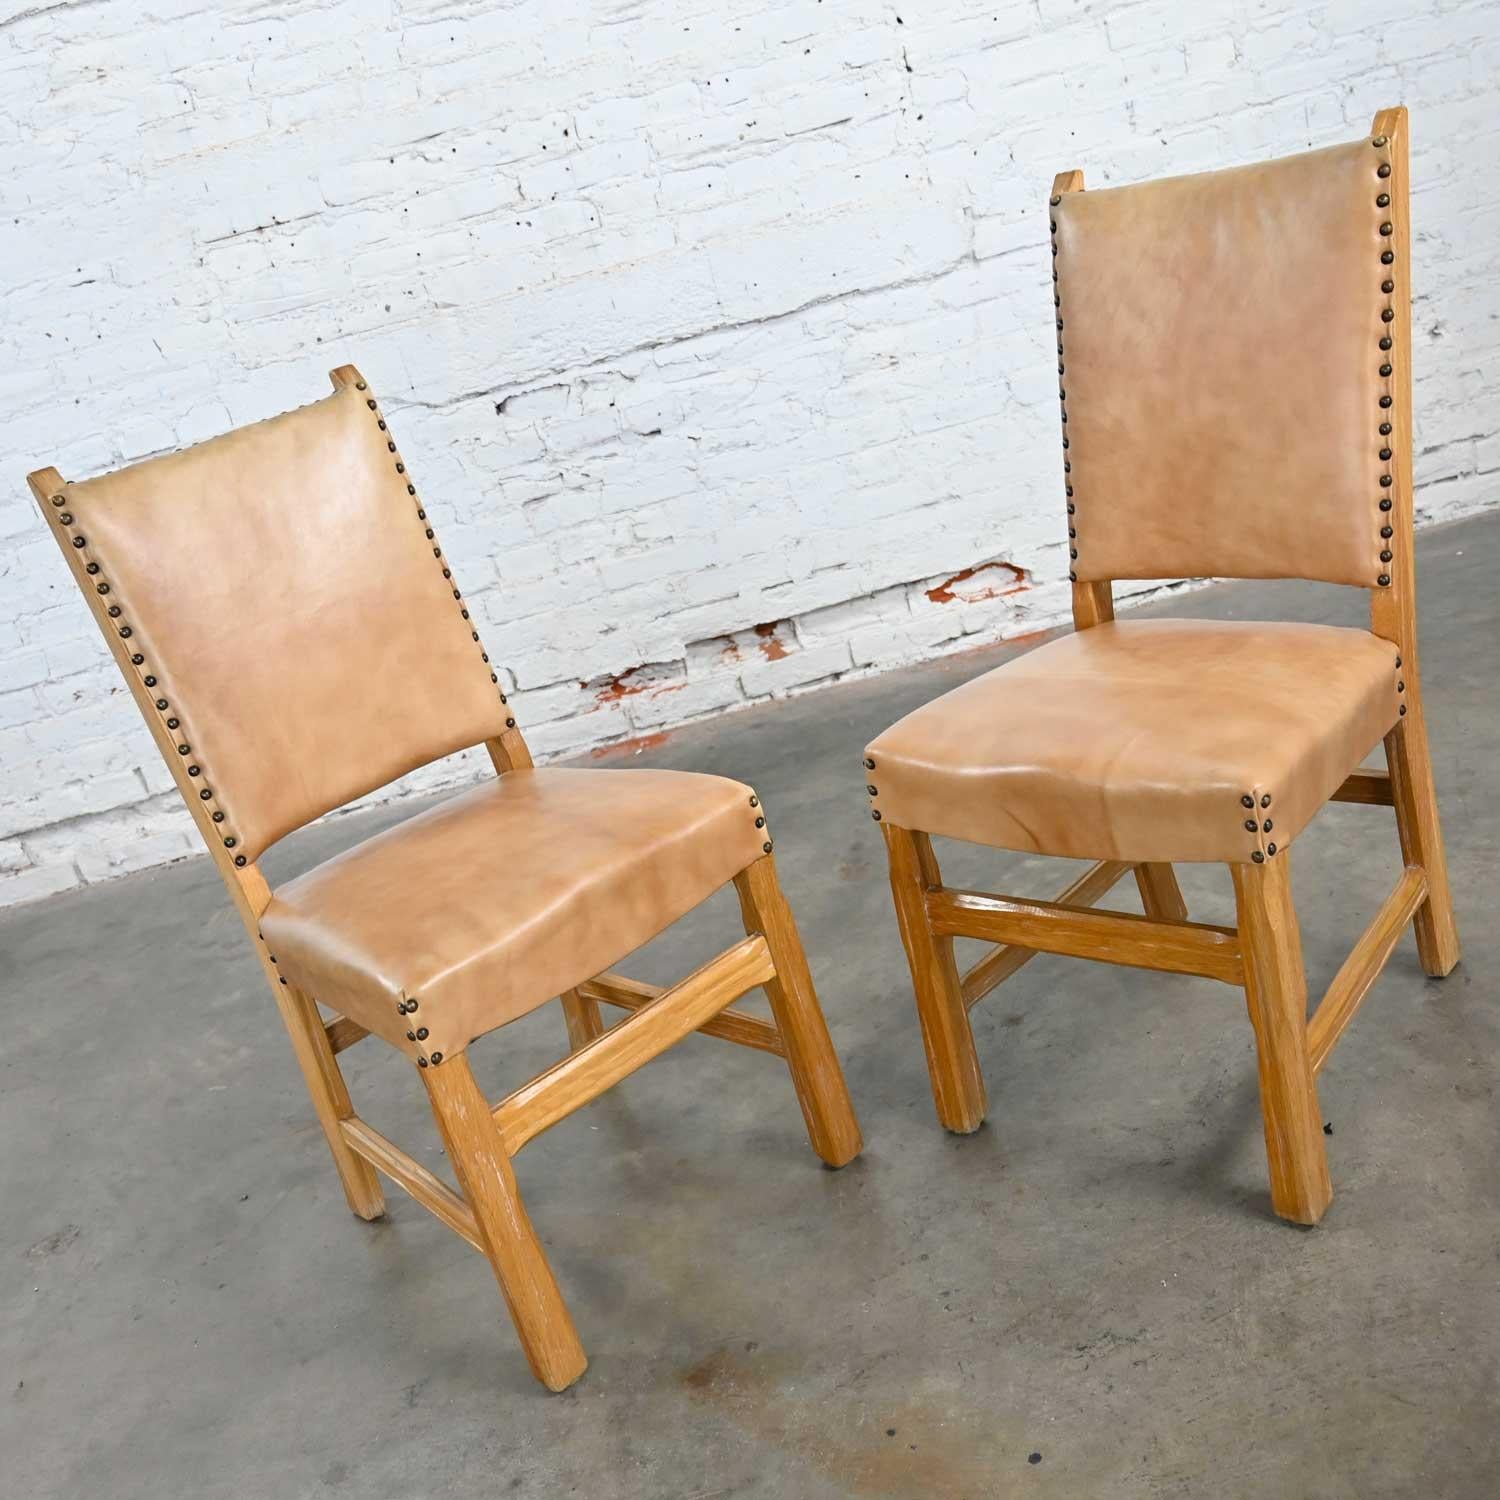 Wonderful pair of side chairs reupholstered in beige vinyl or faux leather with antiqued brass nail head trim details attributed to Ranch Oak by A. Brandt Company. Beautiful condition, keeping in mind that these are vintage and not new so will have